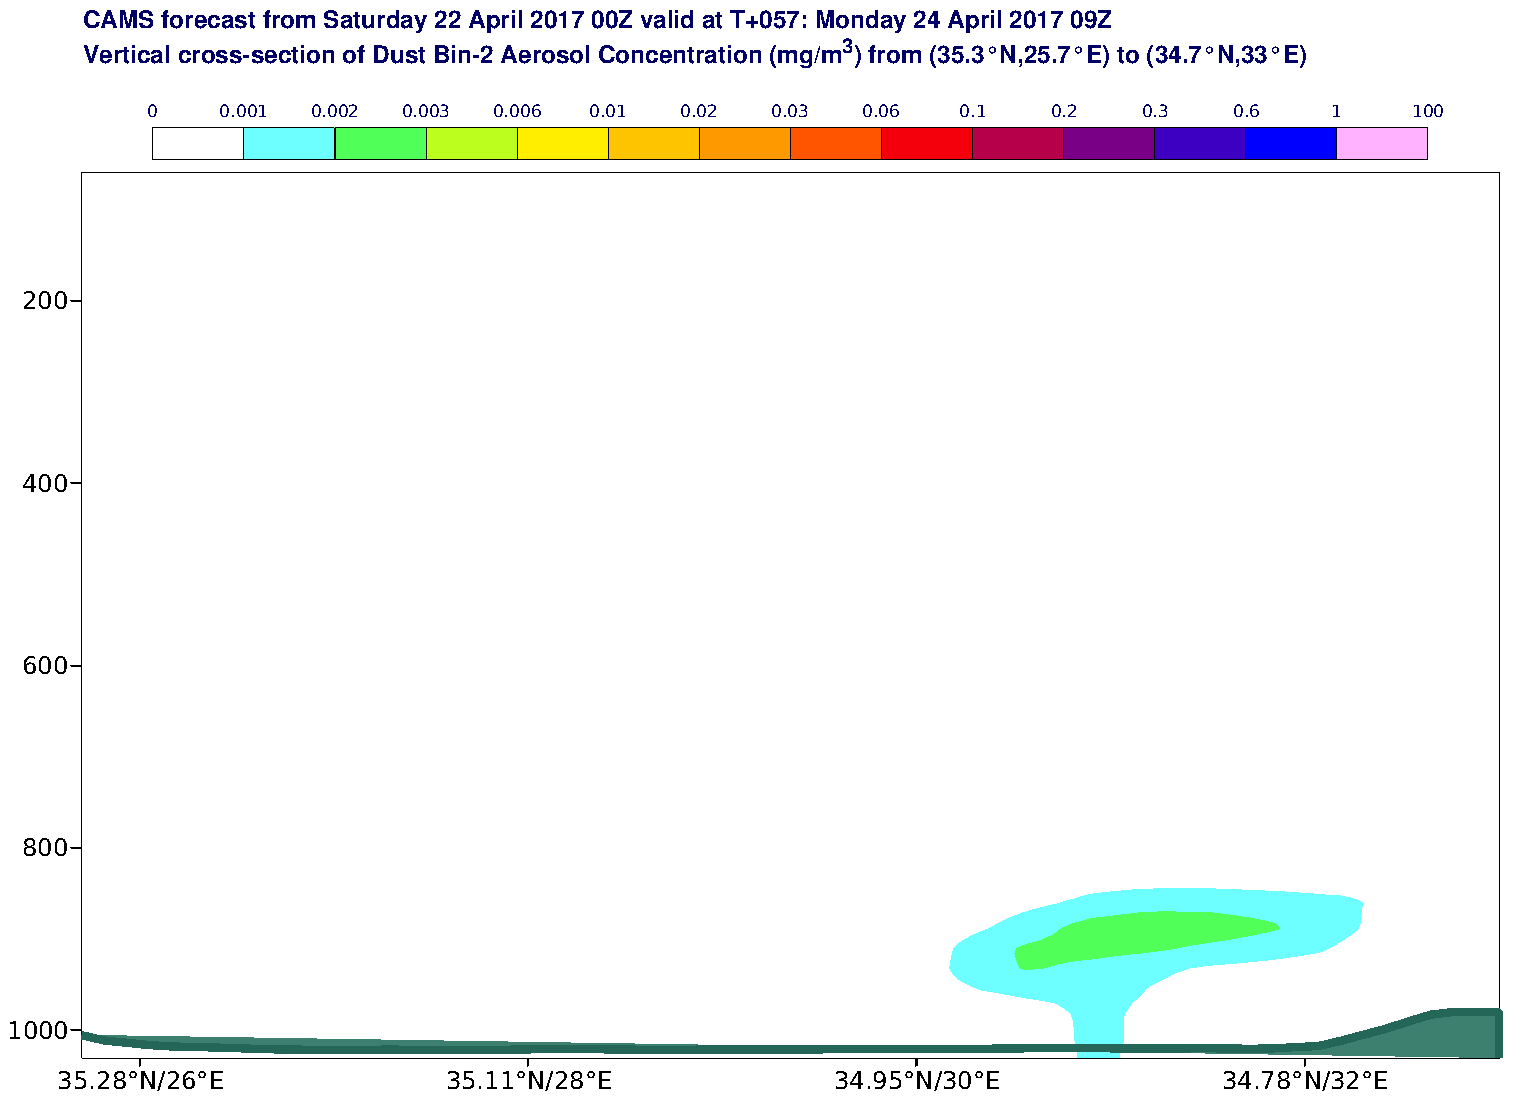 Vertical cross-section of Dust Bin-2 Aerosol Concentration (mg/m3) valid at T57 - 2017-04-24 09:00